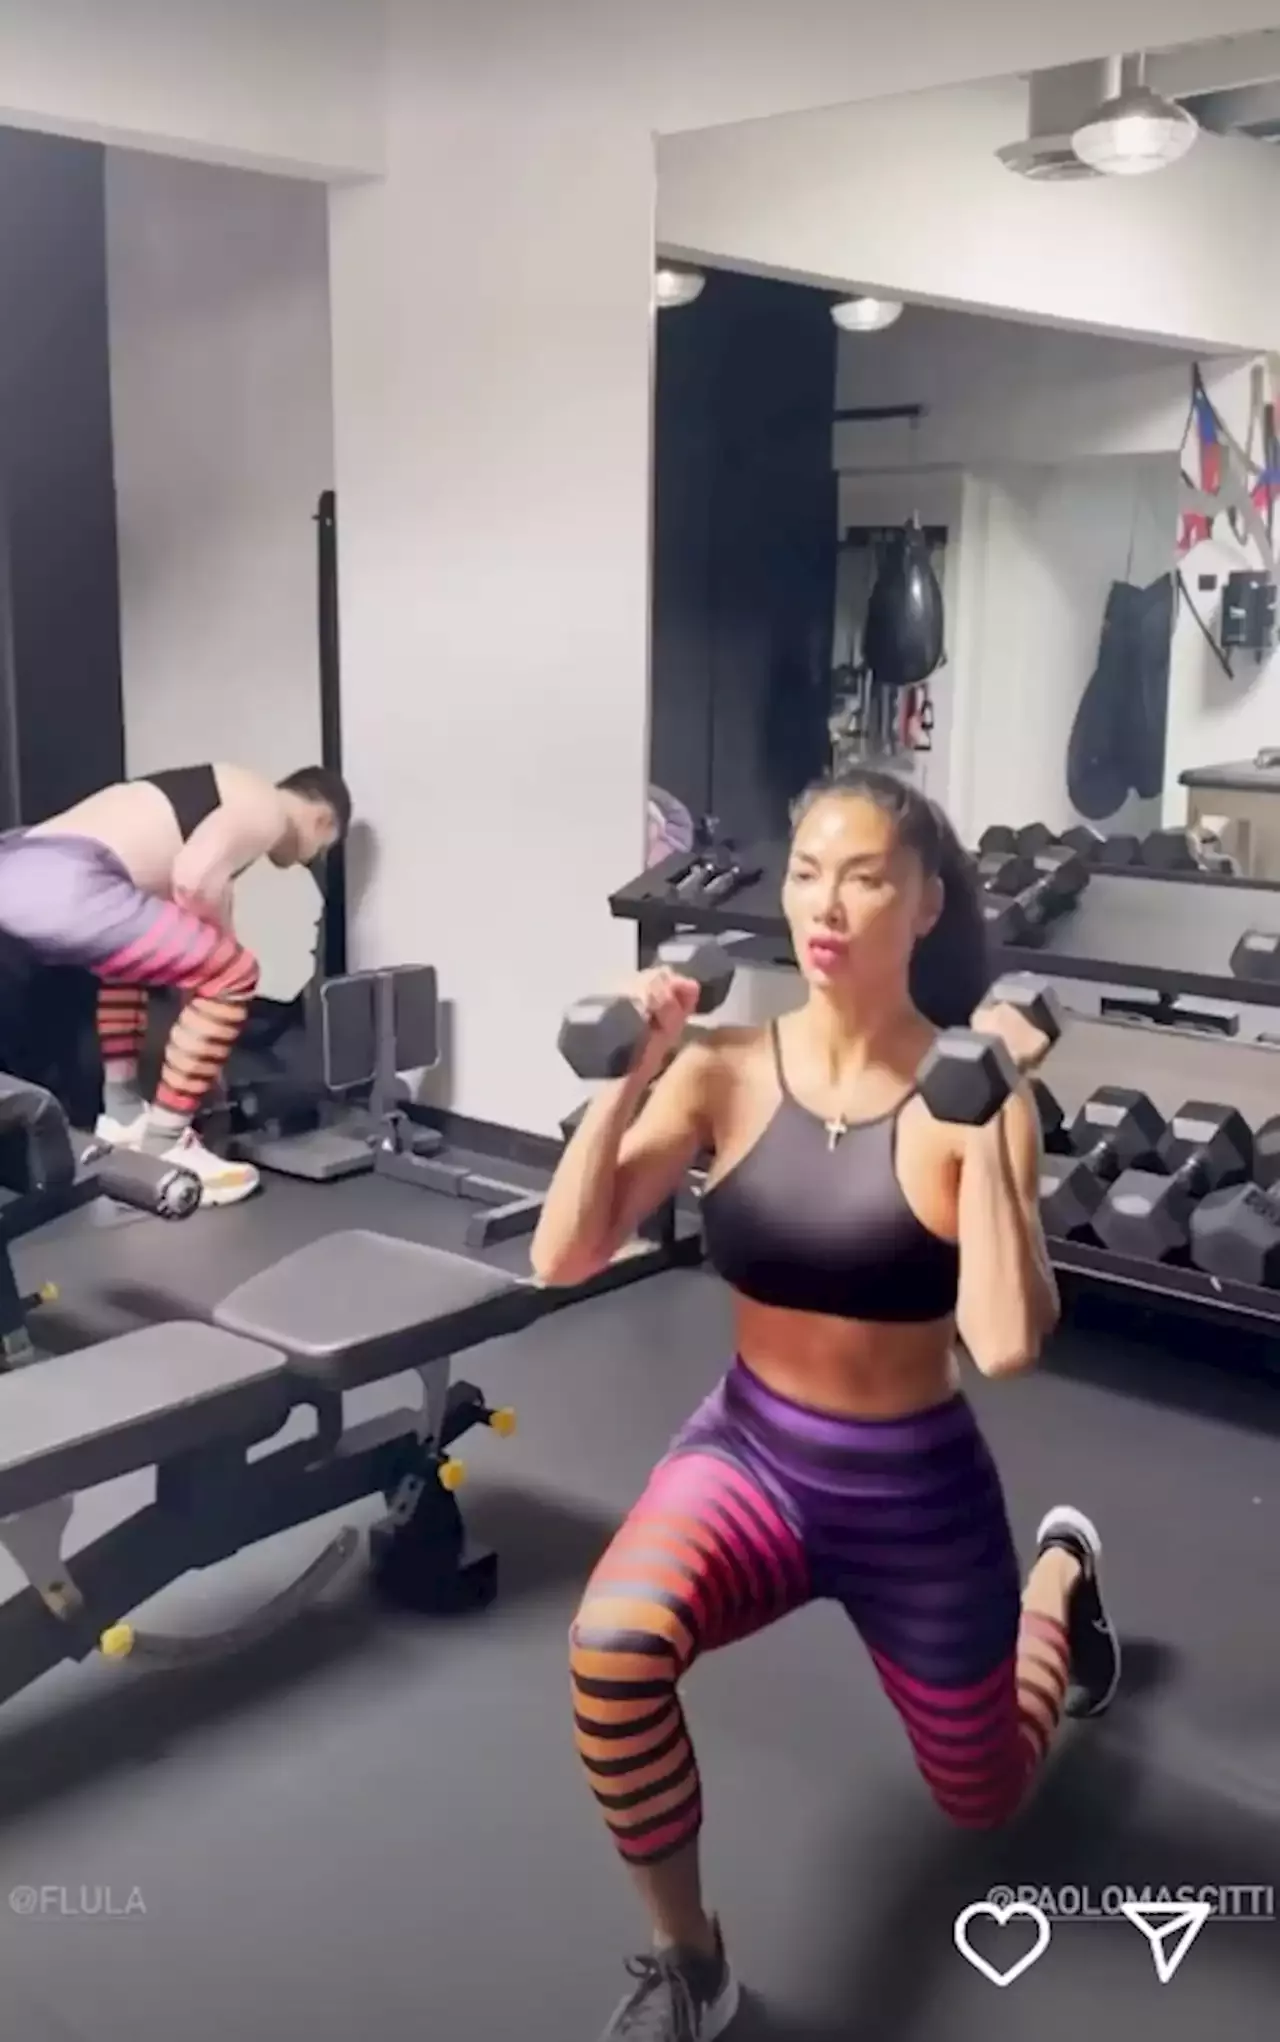 Nicole Scherzinger Shows Off Her Incredible Abs In Sports Bra And Colourful Leggings As She